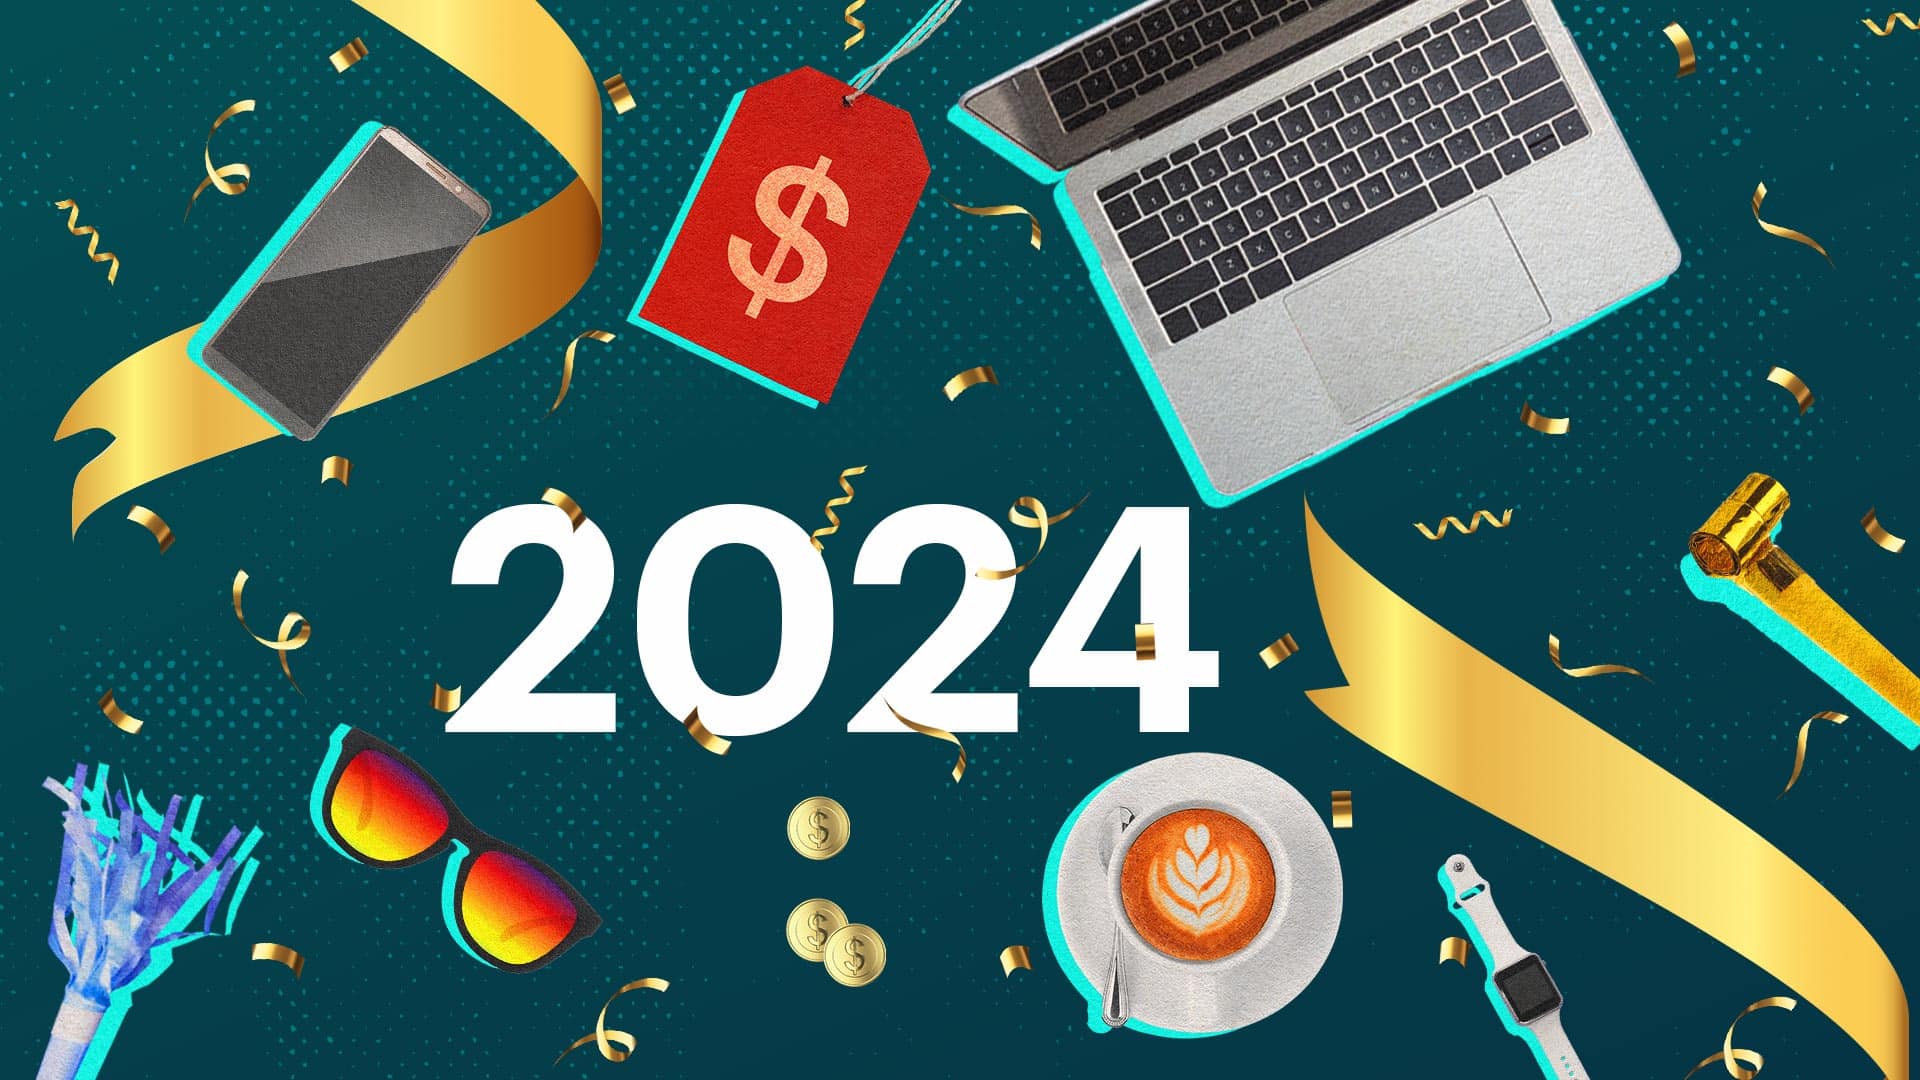 Your Score in 2024, Ribbons, Price tag, Laptop, smart phone, sunglasses, coffee, noise makers, smart watch, dollar coins.